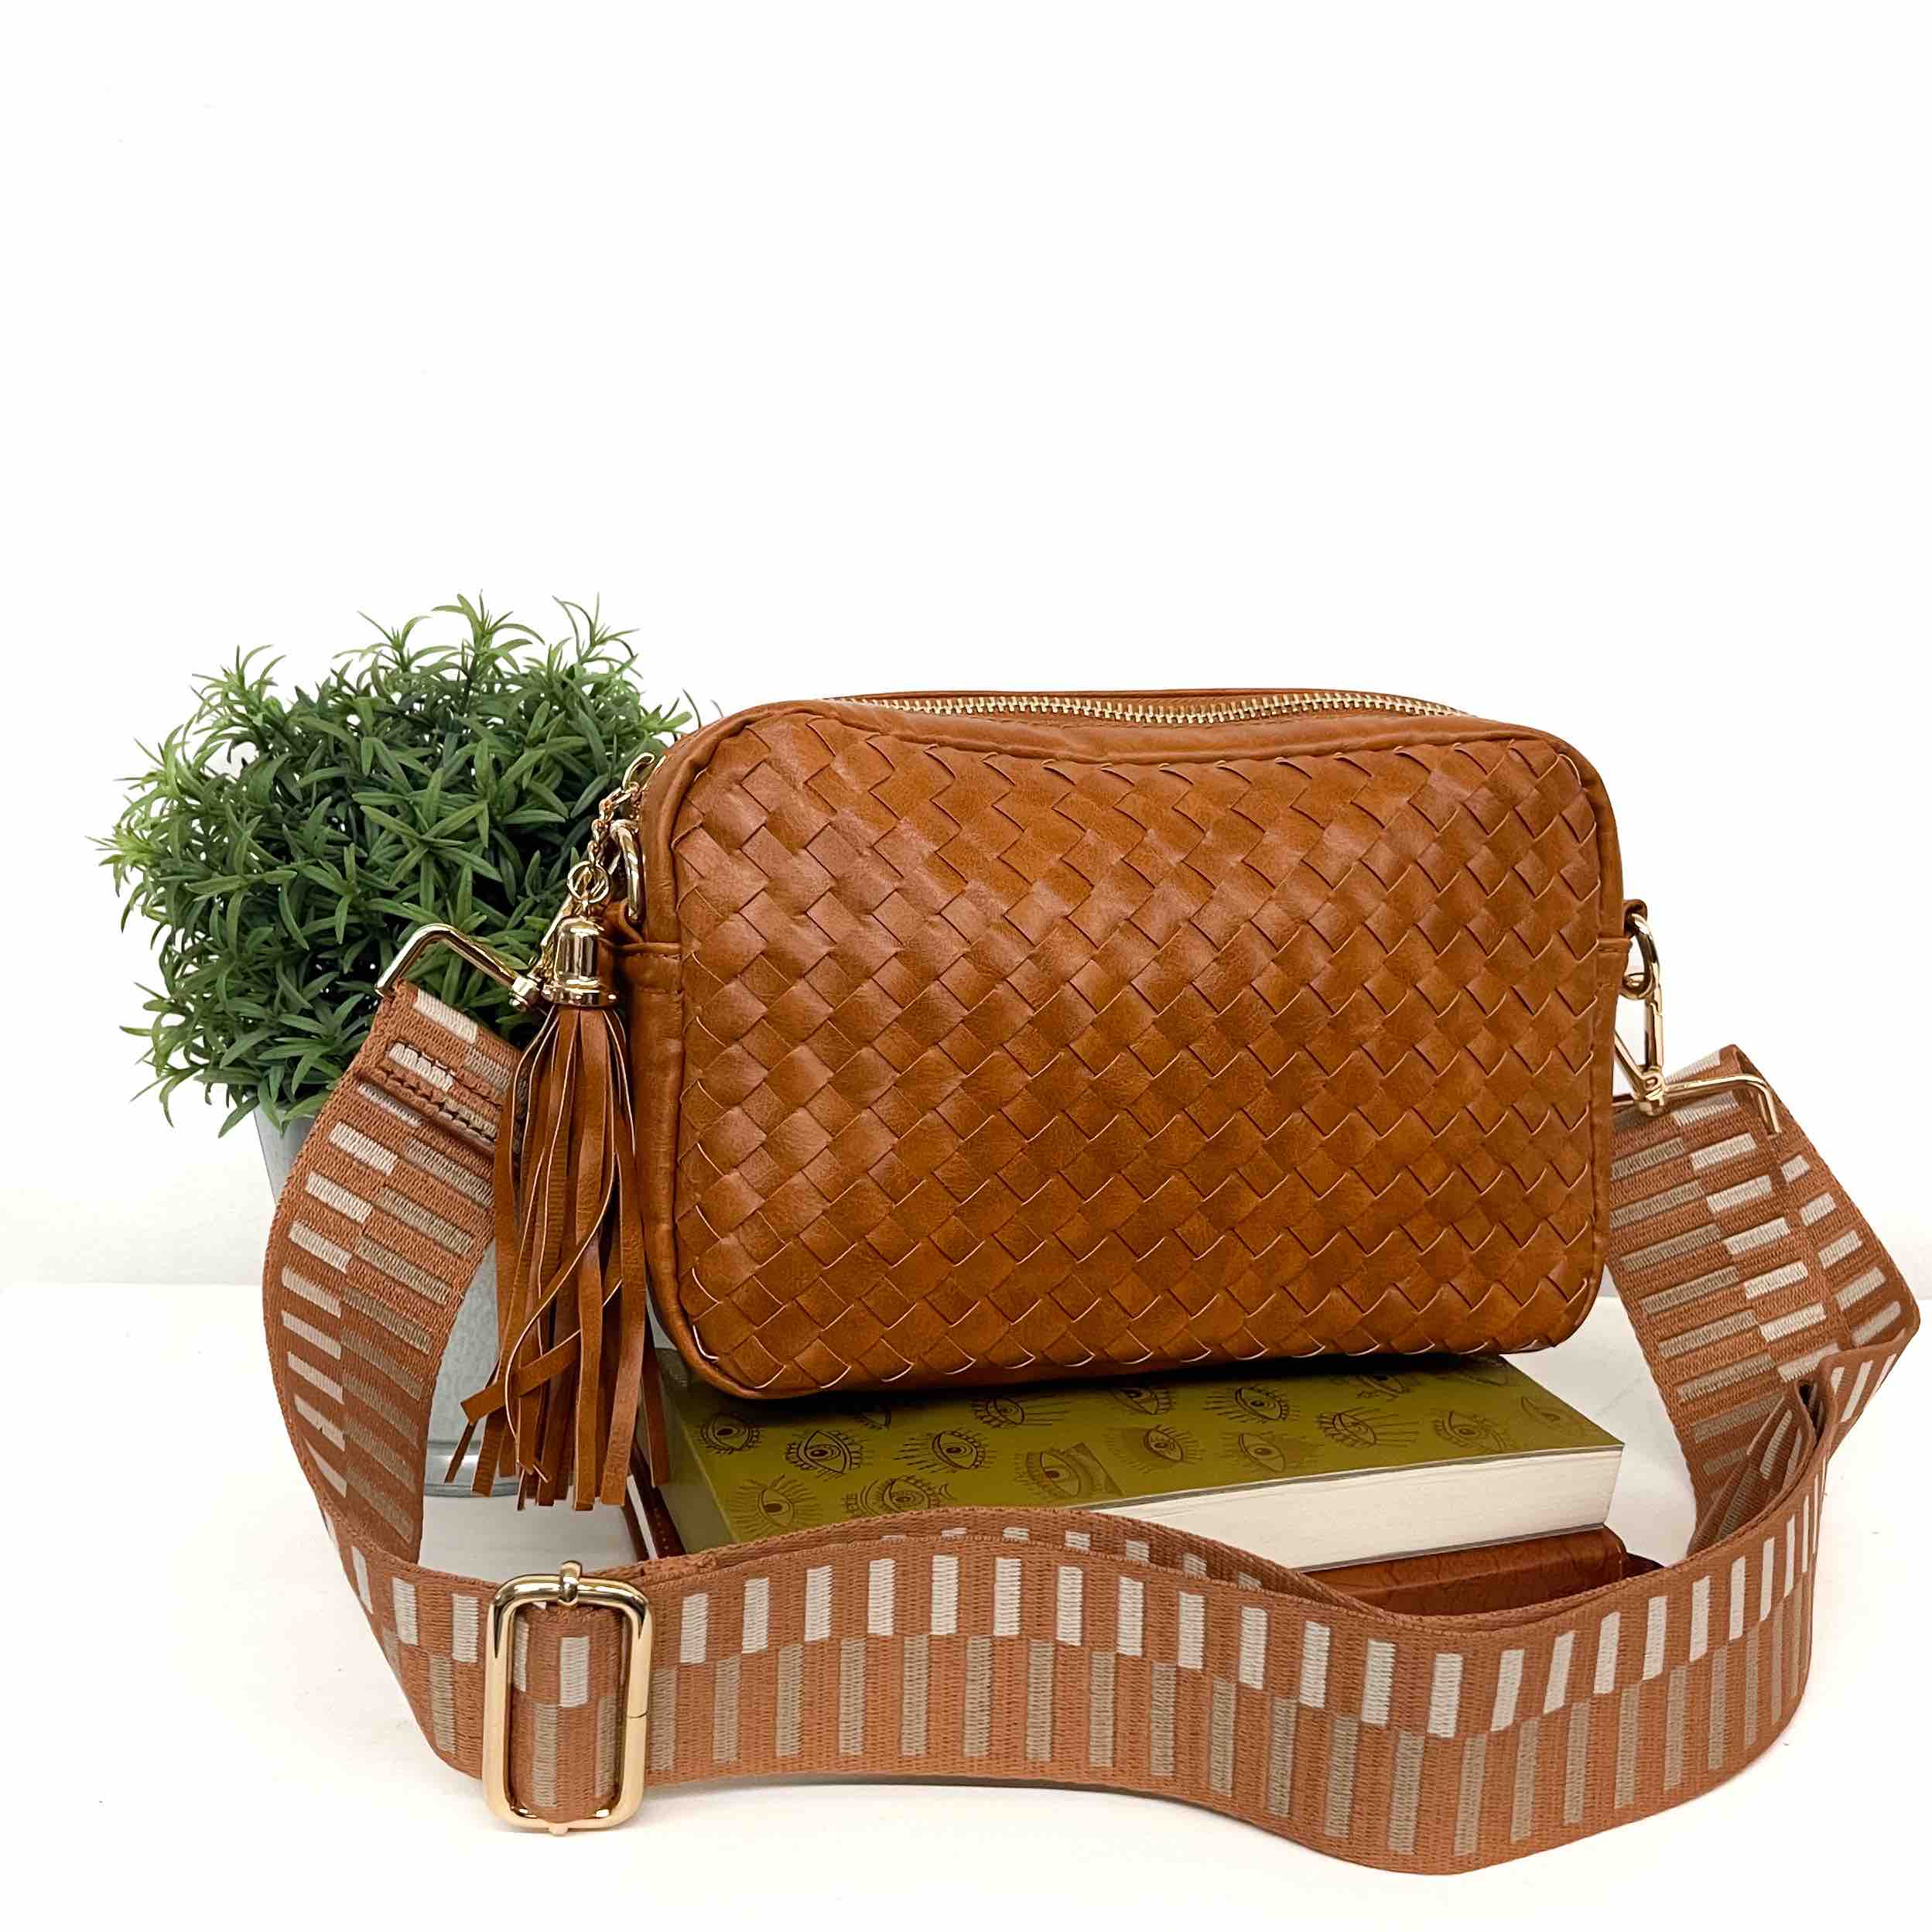 Woven Willow Camera Crossbody Bag - Multiple Colors